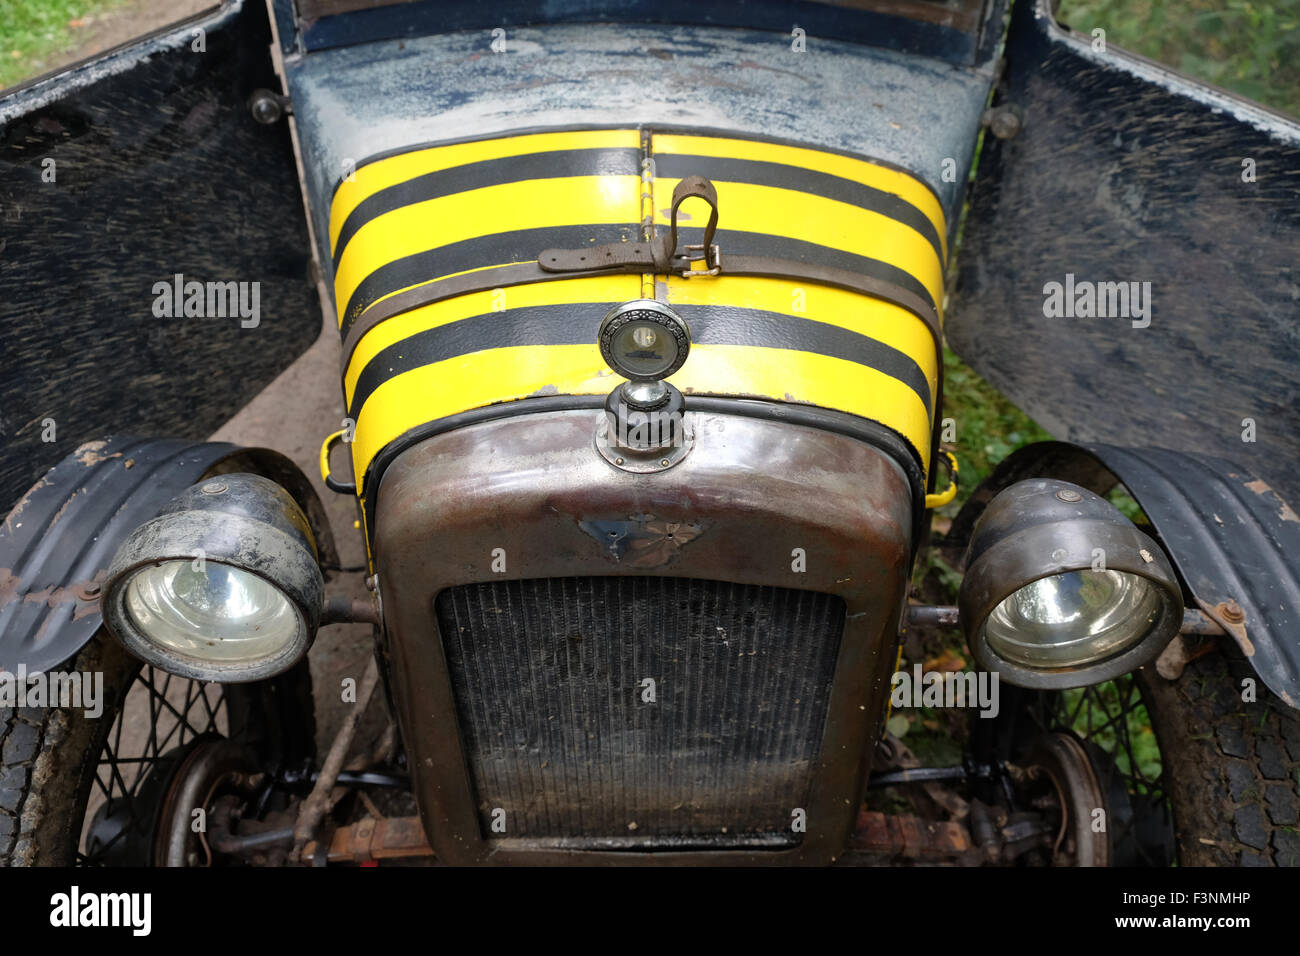 New Radnor, Powys, Wales - Saturday 10th October 2015 - The Vintage Sports Car Club ( VSCC ) hill climb trial challenge on The Smatcher a steep wooded hill just outside New Radnor. Shown here is a muddy 1929 Austin 7 Saloon with forward opening doors. Stock Photo